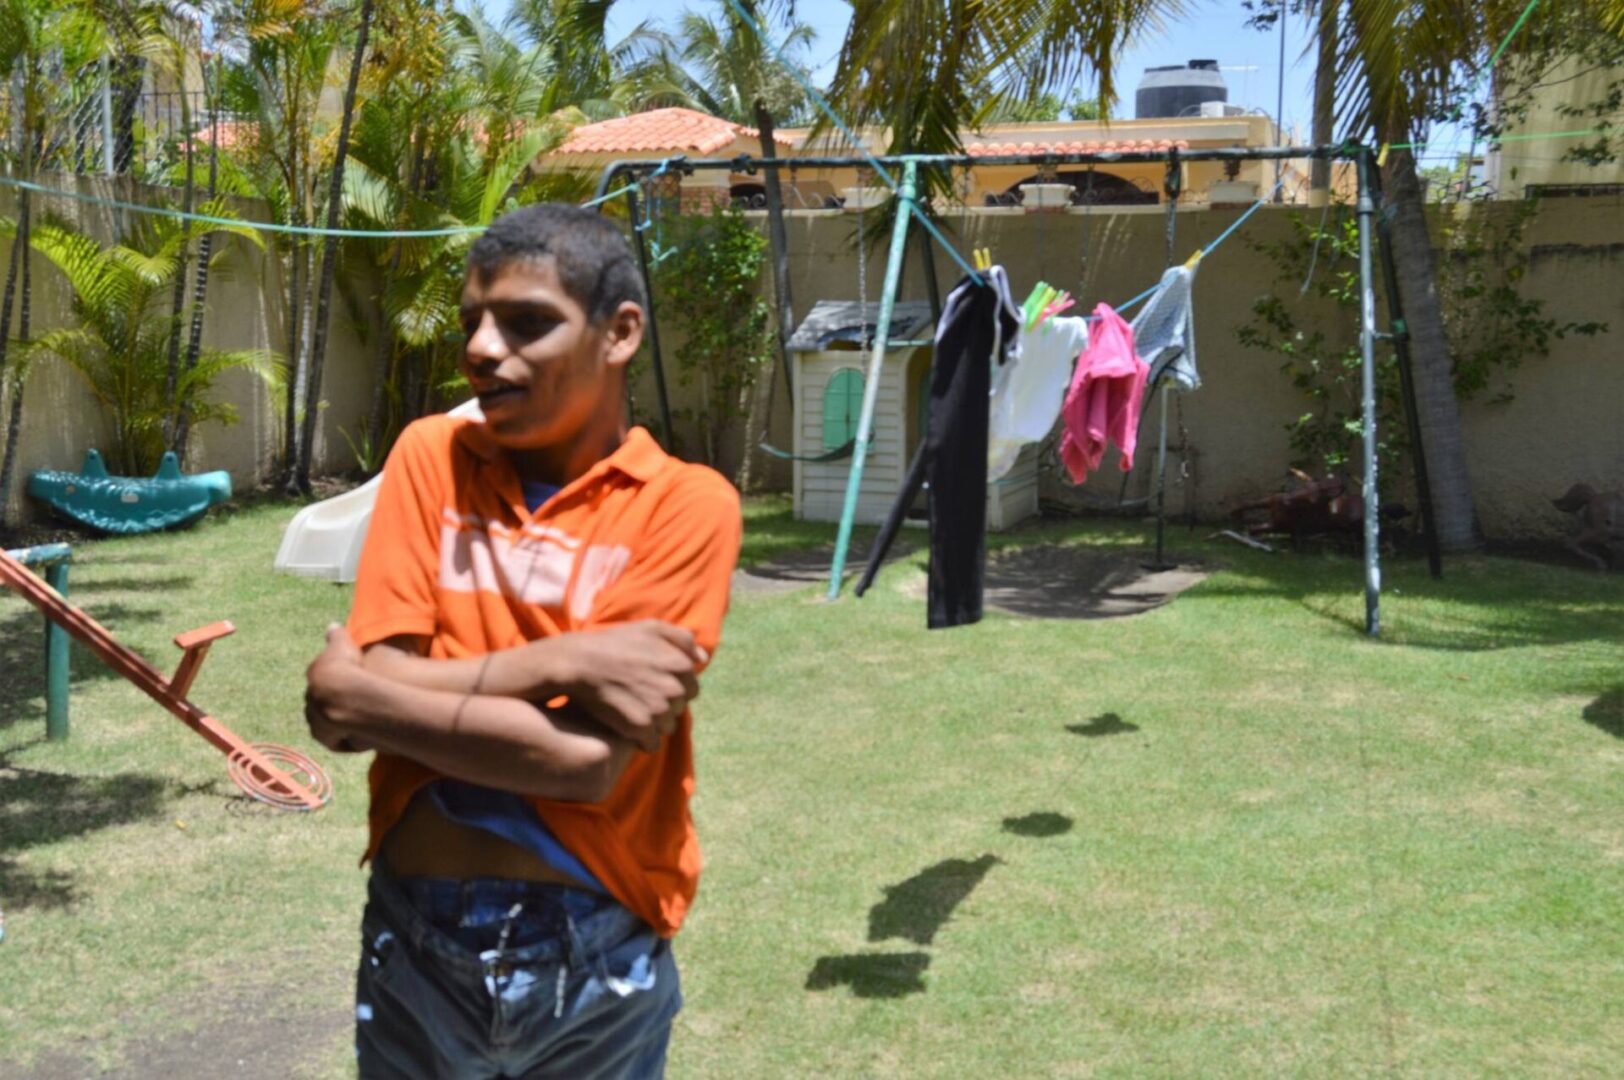 A boy in an orange shirt hugging himself and a clothesline and playground at his back